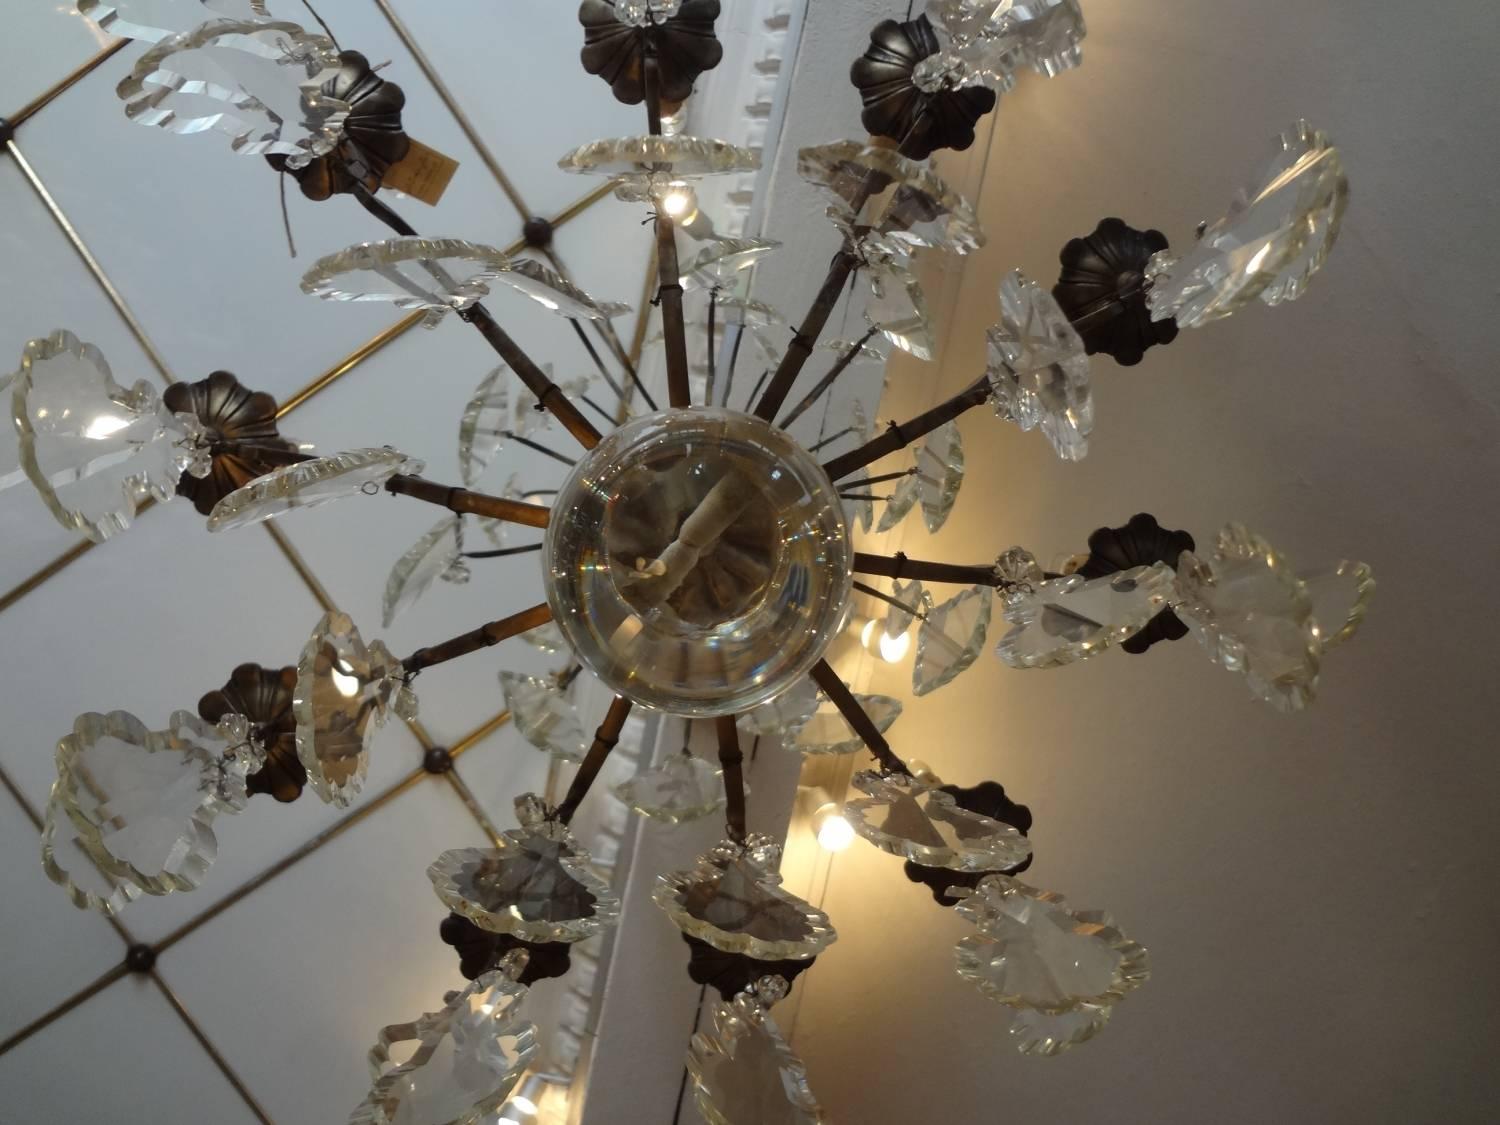 Antique French prism filled chandelier with a dark bronze patina. Wonderfully ornamental flat leaf glass prisms, in different sizes. Holds ten candle shaped light bulbs.